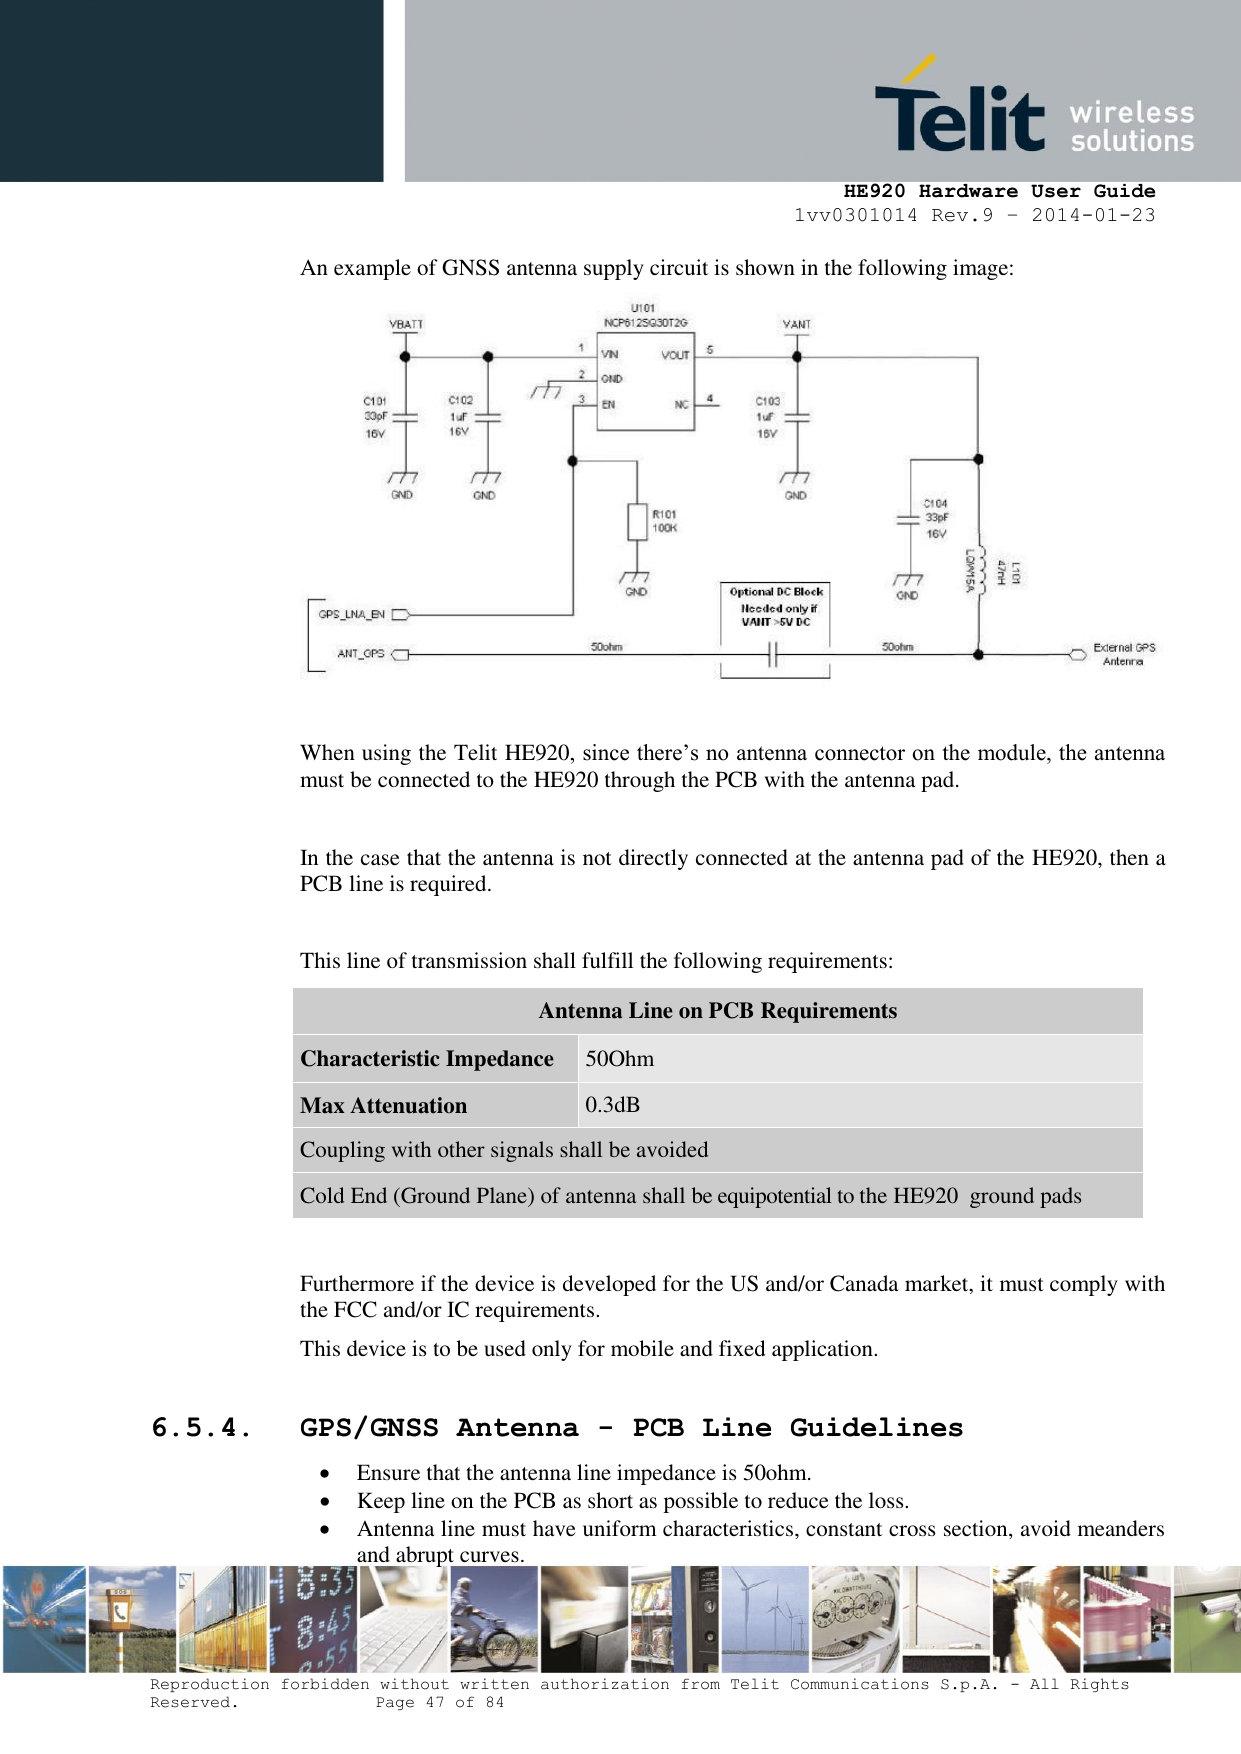     HE920 Hardware User Guide 1vv0301014 Rev.9 – 2014-01-23 Reproduction forbidden without written authorization from Telit Communications S.p.A. - All Rights Reserved.    Page 47 of 84  An example of GNSS antenna supply circuit is shown in the following image:   When using the Telit HE920, since there’s no antenna connector on the module, the antenna must be connected to the HE920 through the PCB with the antenna pad.   In the case that the antenna is not directly connected at the antenna pad of the HE920, then a PCB line is required.  This line of transmission shall fulfill the following requirements: Antenna Line on PCB Requirements Characteristic Impedance 50Ohm Max Attenuation 0.3dB Coupling with other signals shall be avoided Cold End (Ground Plane) of antenna shall be equipotential to the HE920  ground pads  Furthermore if the device is developed for the US and/or Canada market, it must comply with the FCC and/or IC requirements. This device is to be used only for mobile and fixed application.   6.5.4. GPS/GNSS Antenna - PCB Line Guidelines  Ensure that the antenna line impedance is 50ohm.  Keep line on the PCB as short as possible to reduce the loss.  Antenna line must have uniform characteristics, constant cross section, avoid meanders and abrupt curves. 